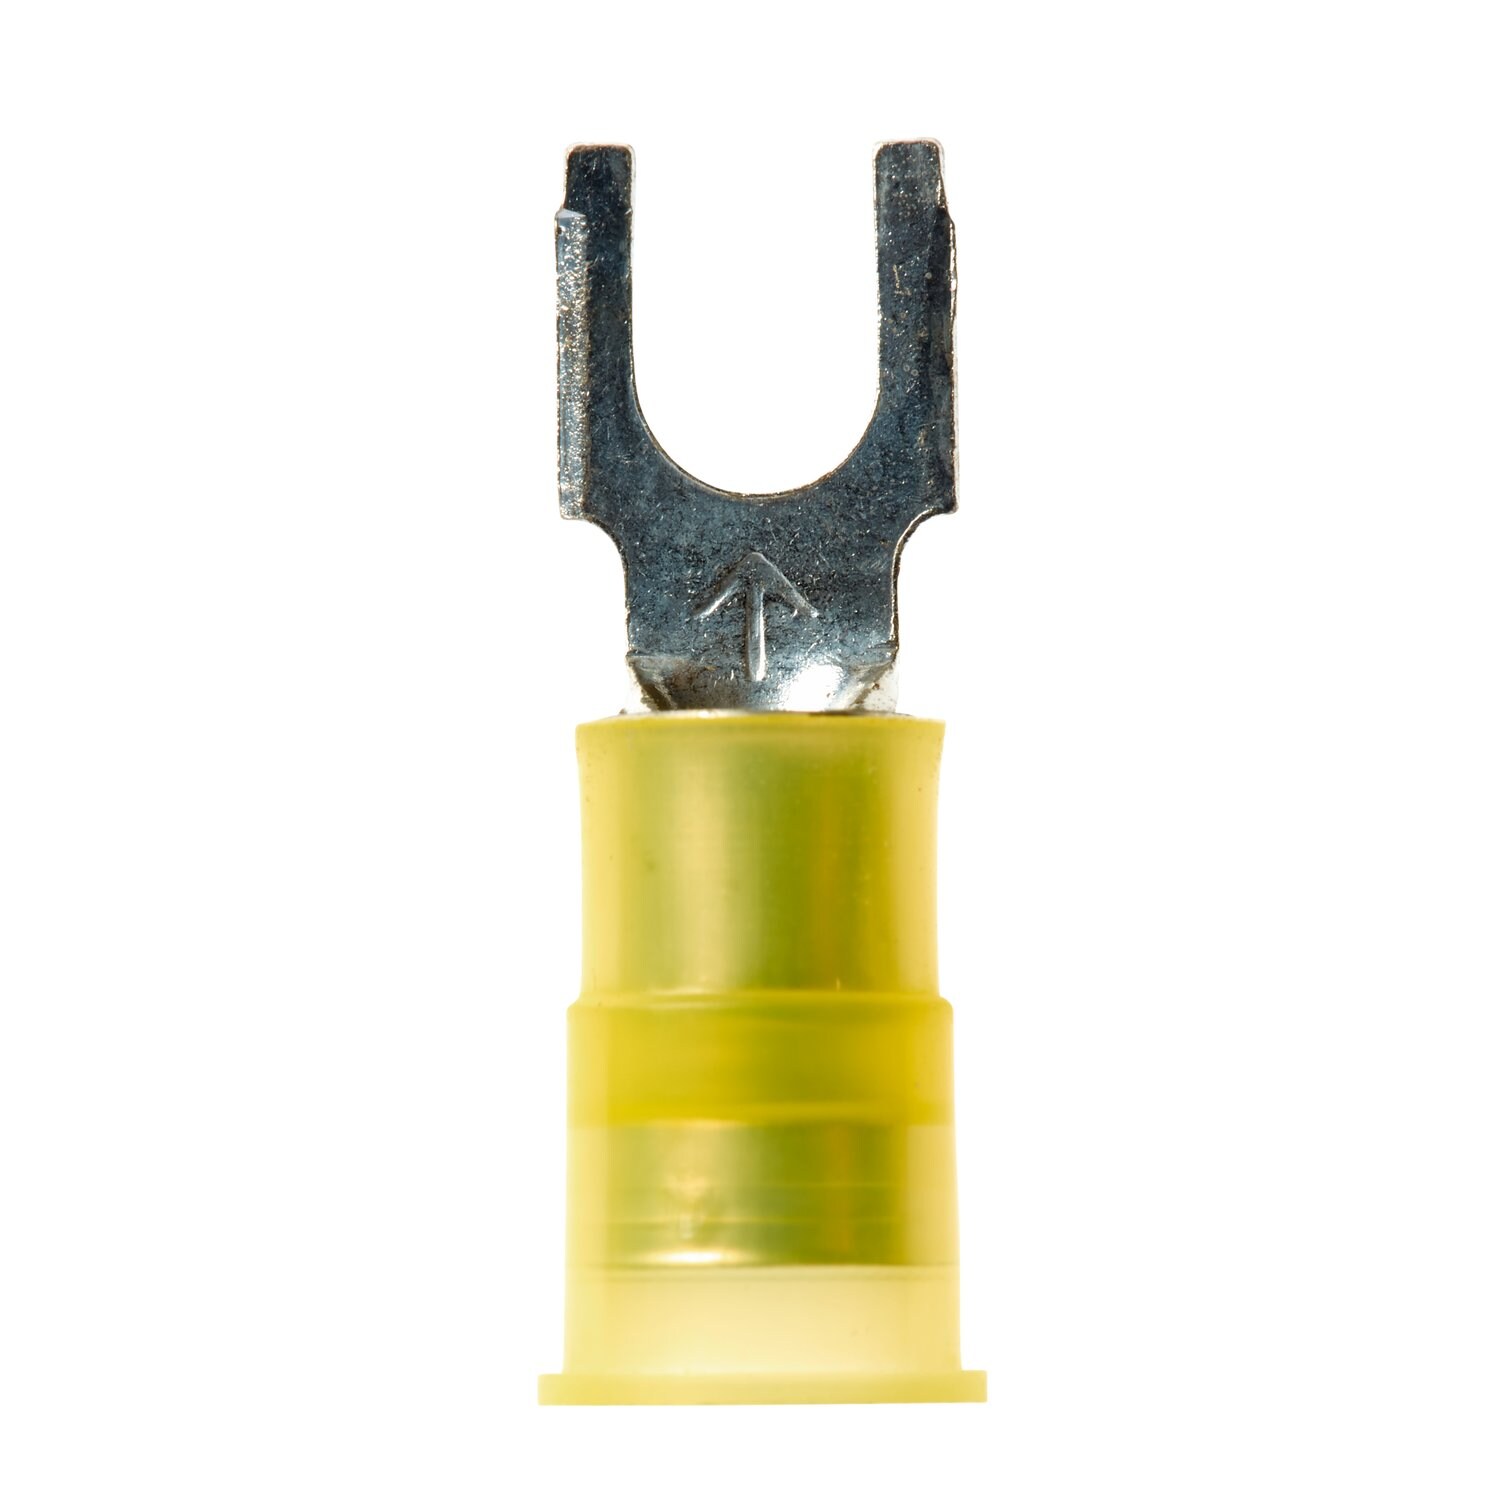 7000133299 - 3M Scotchlok Block Fork Nylon Insulated, 50/bottle, MNG10-6FBX,
suitable for use in a terminal block, 500/Case